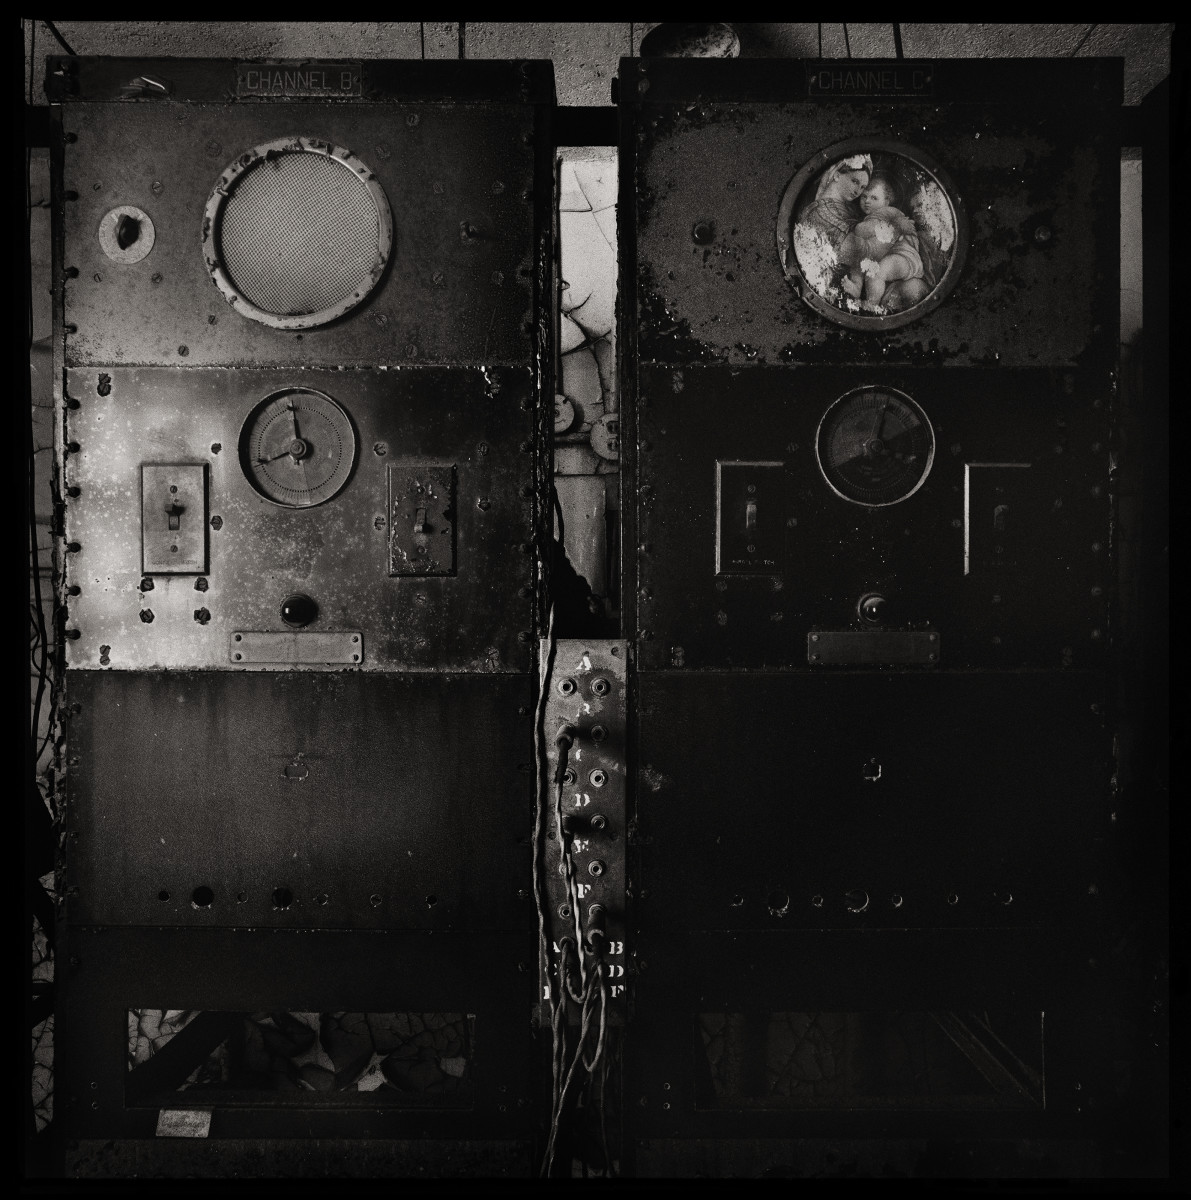 Religion Radio by Eric T. Kunsman  Image: ID: A black and white image shows two metal rectangles side by side.  They each have two circles, the bottom of which is a dial.  The top circle on the right machine have a picture of a religious figurehead.